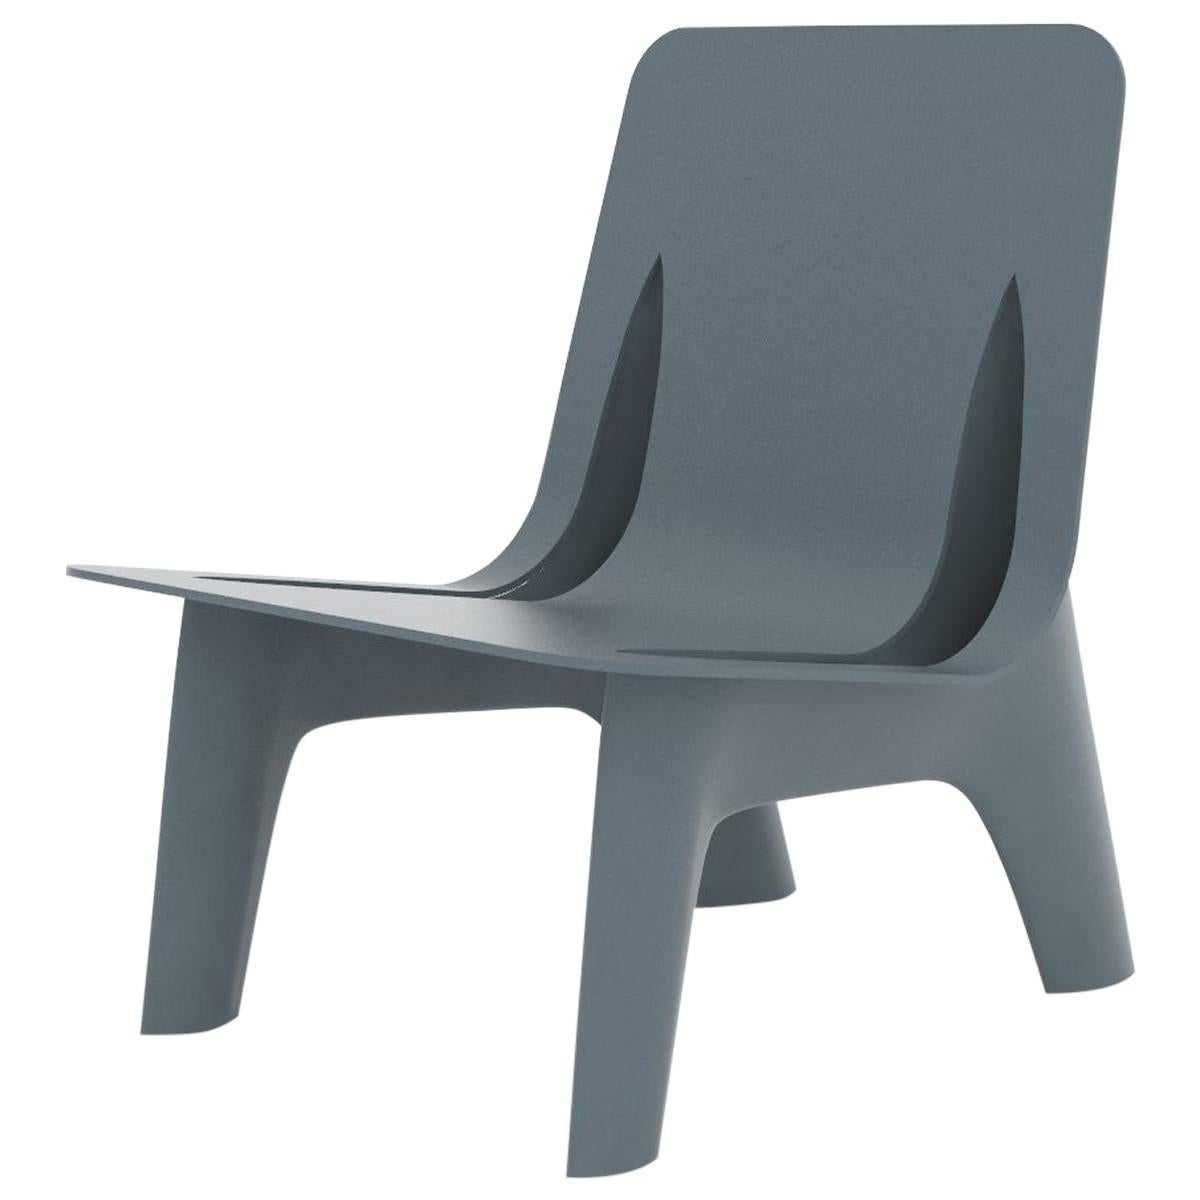 J-Chair Lounge Polished Grey Blue Color Aluminum Seating by Zieta